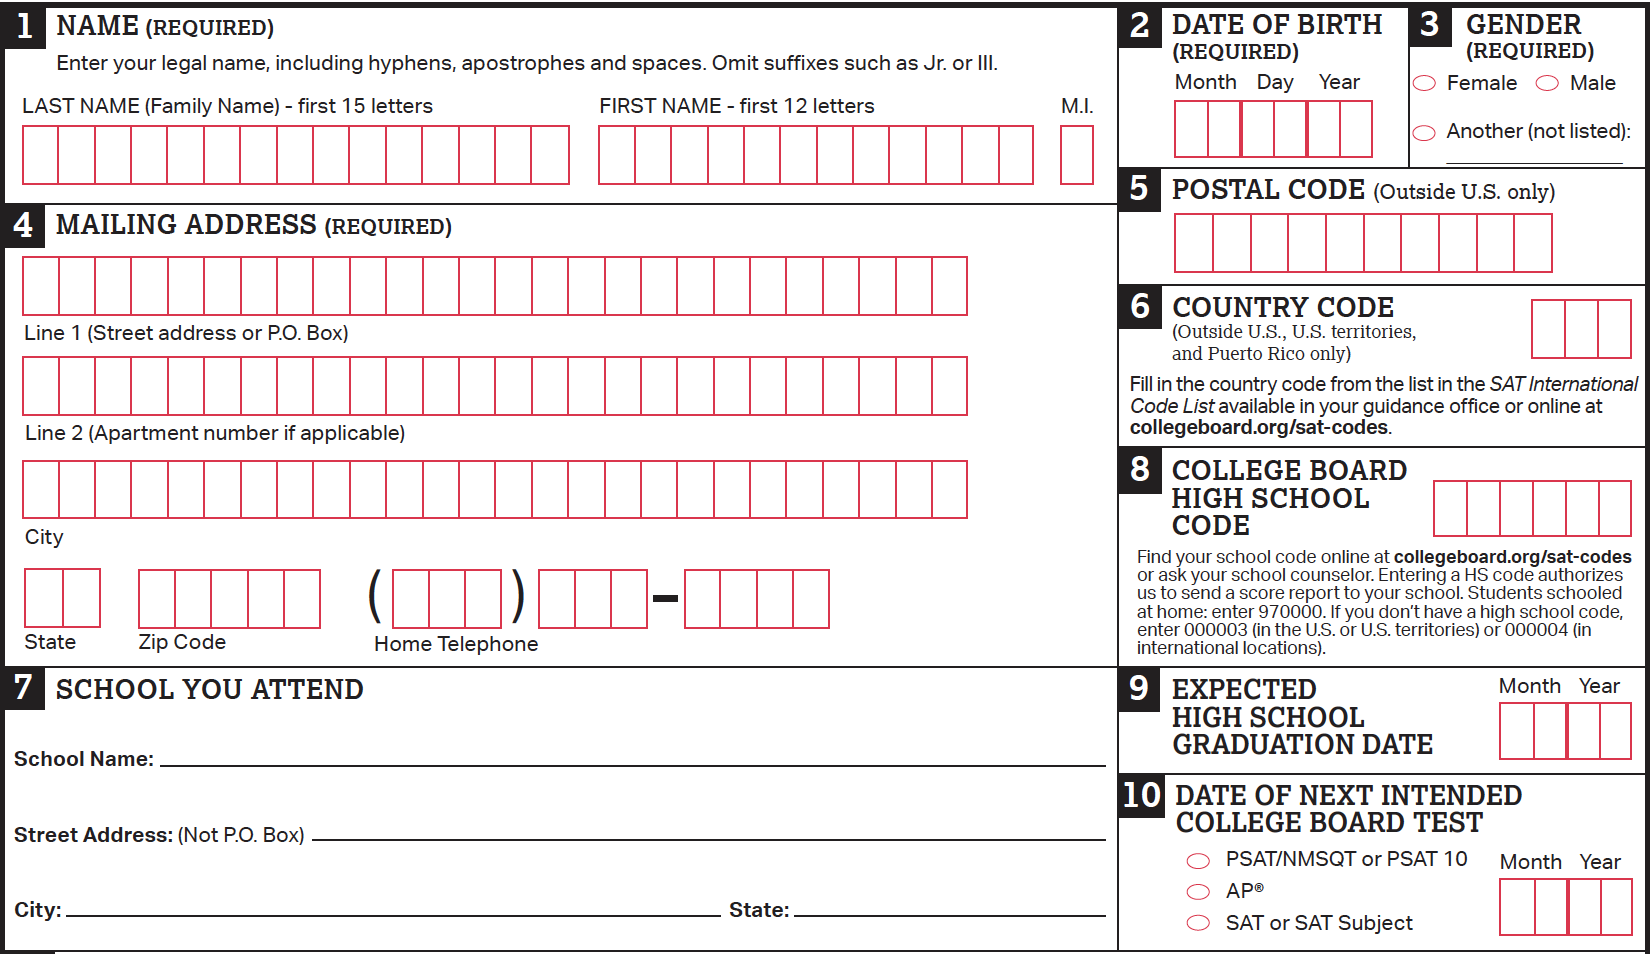 A screenshot of sections 1-10, identifying information, on the paper Student Eligibility Form